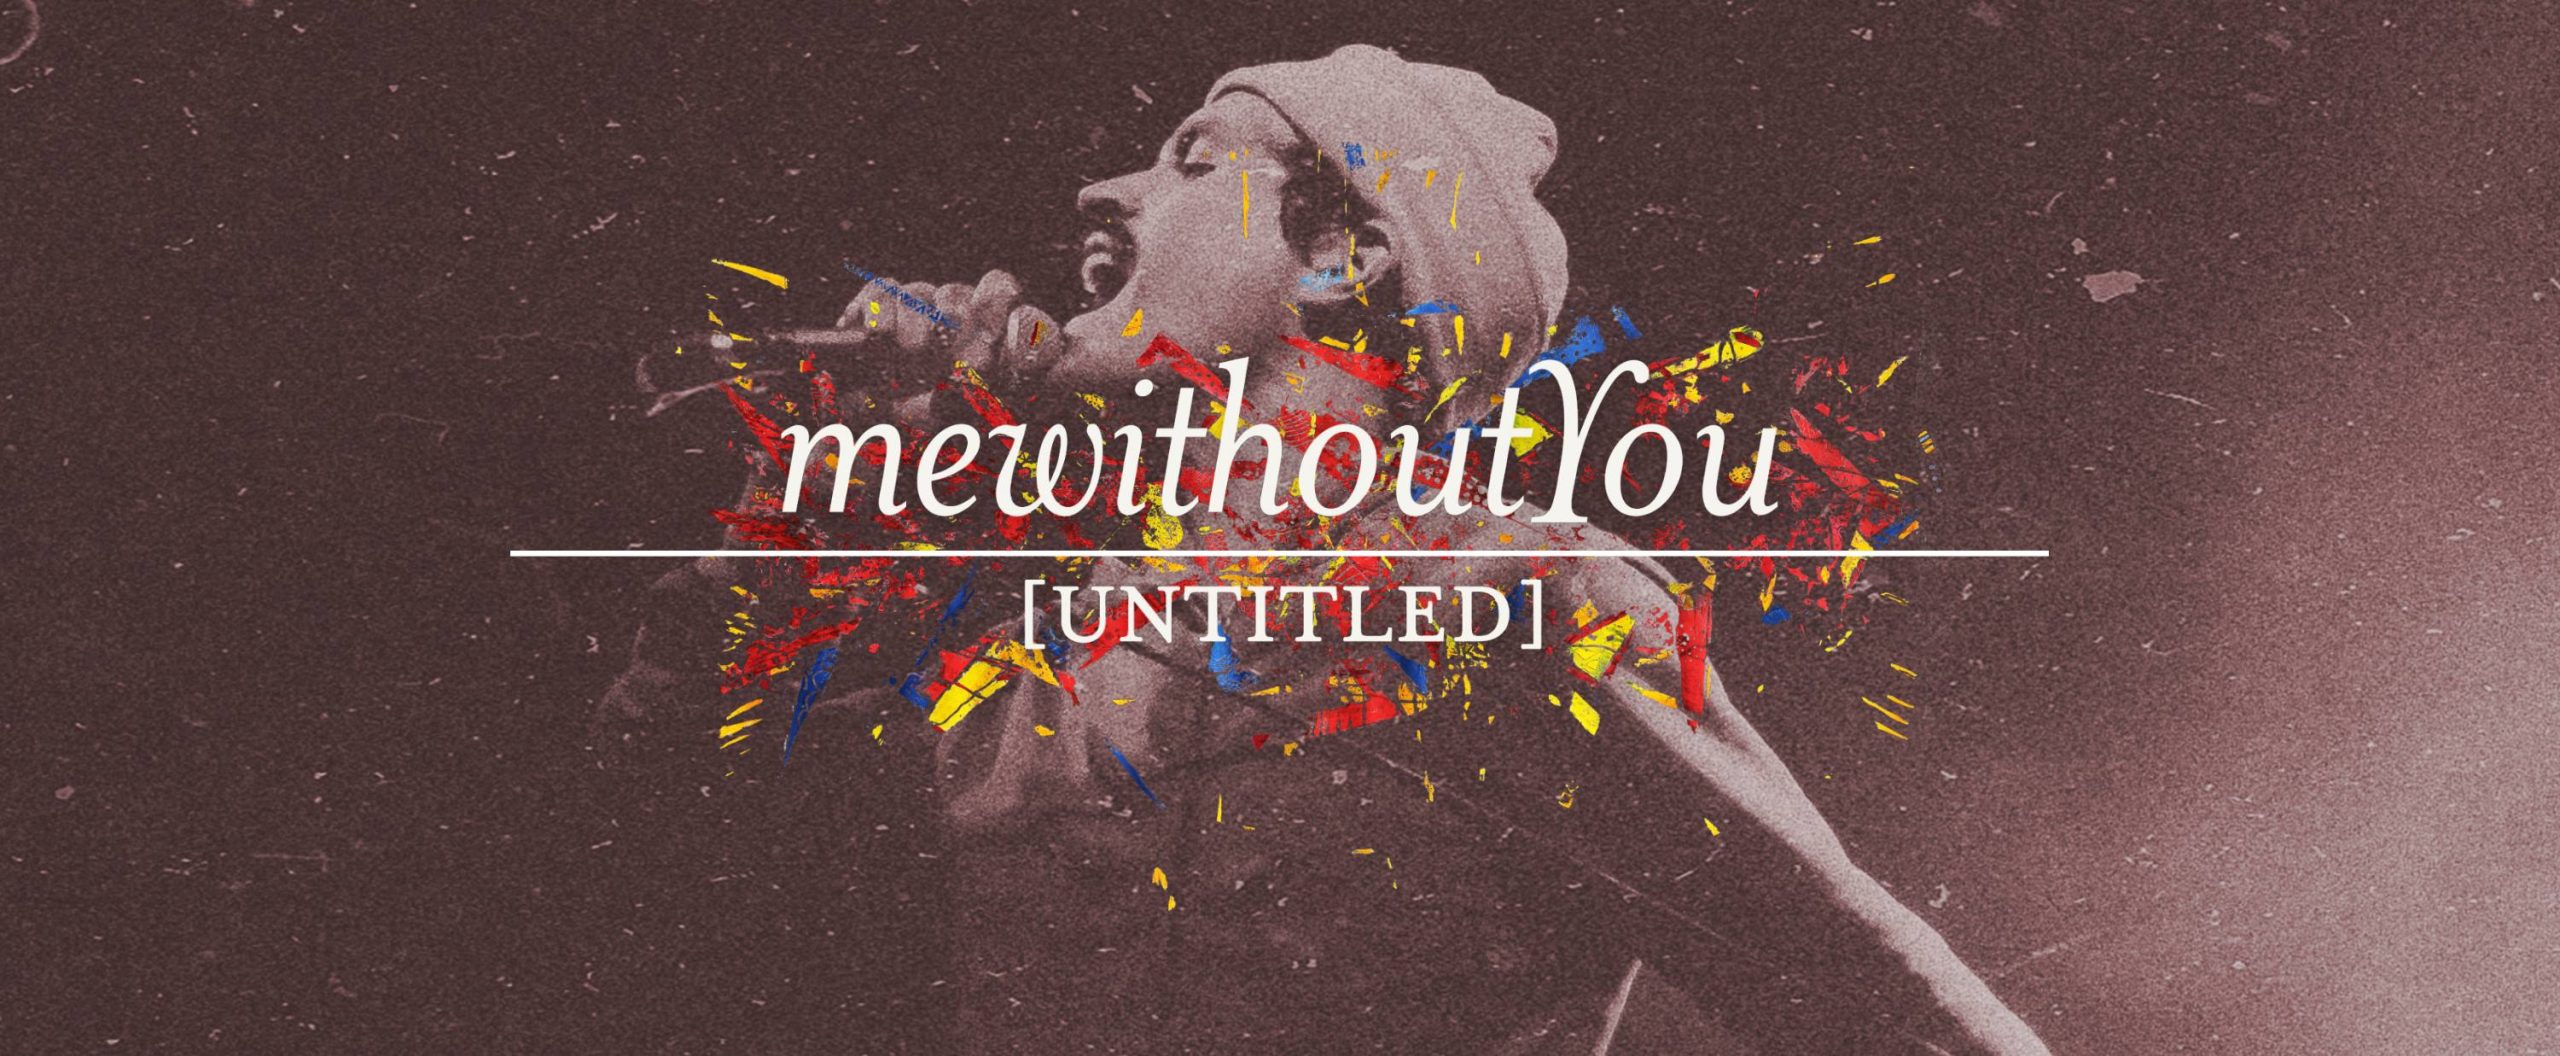 untitled ep by mewithoutyou - banner